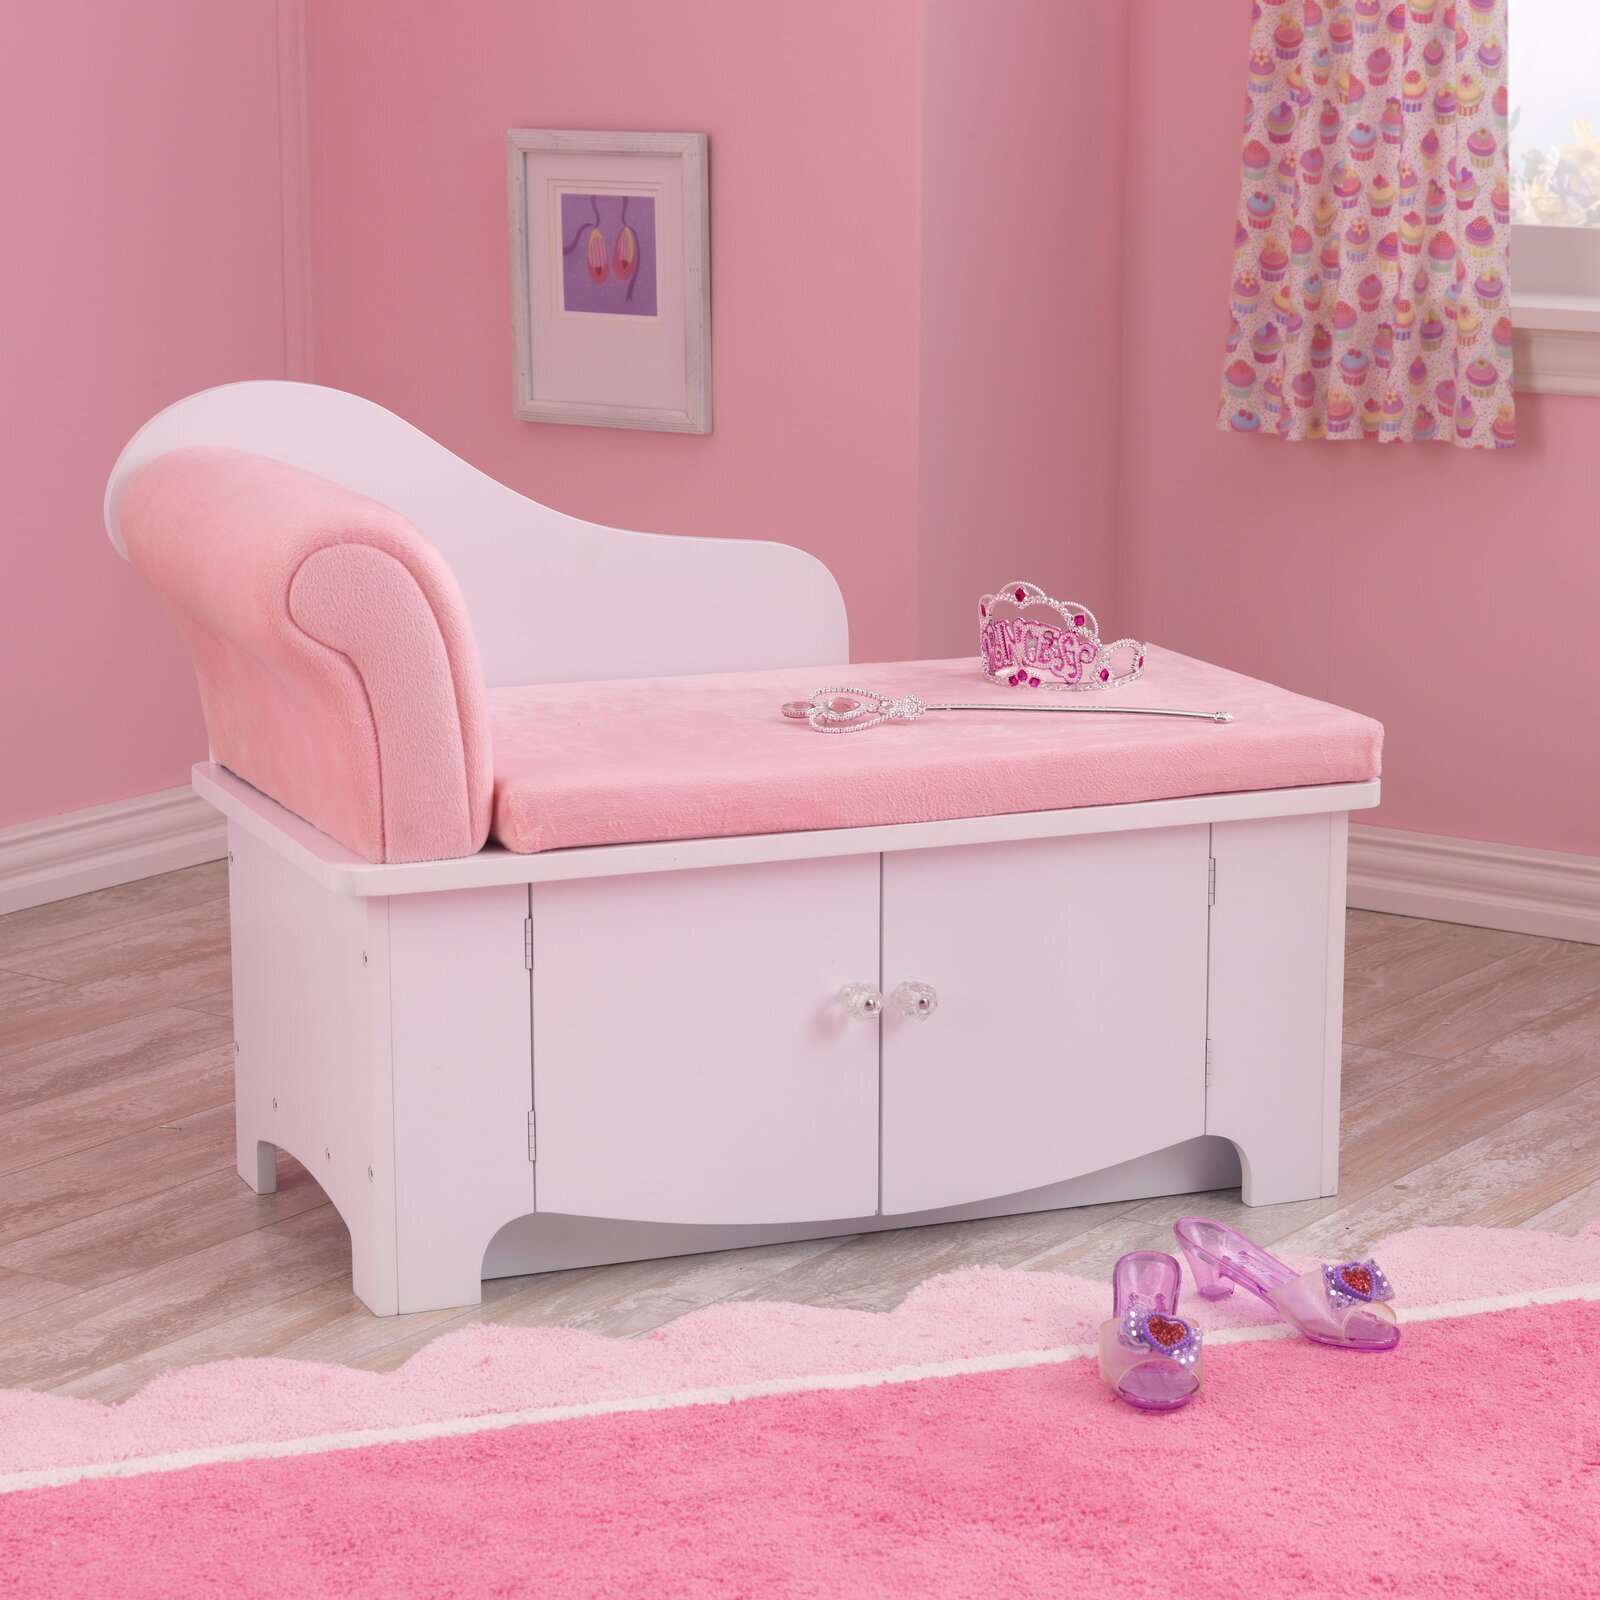 Kids Bedroom Chair with Storage Compartment